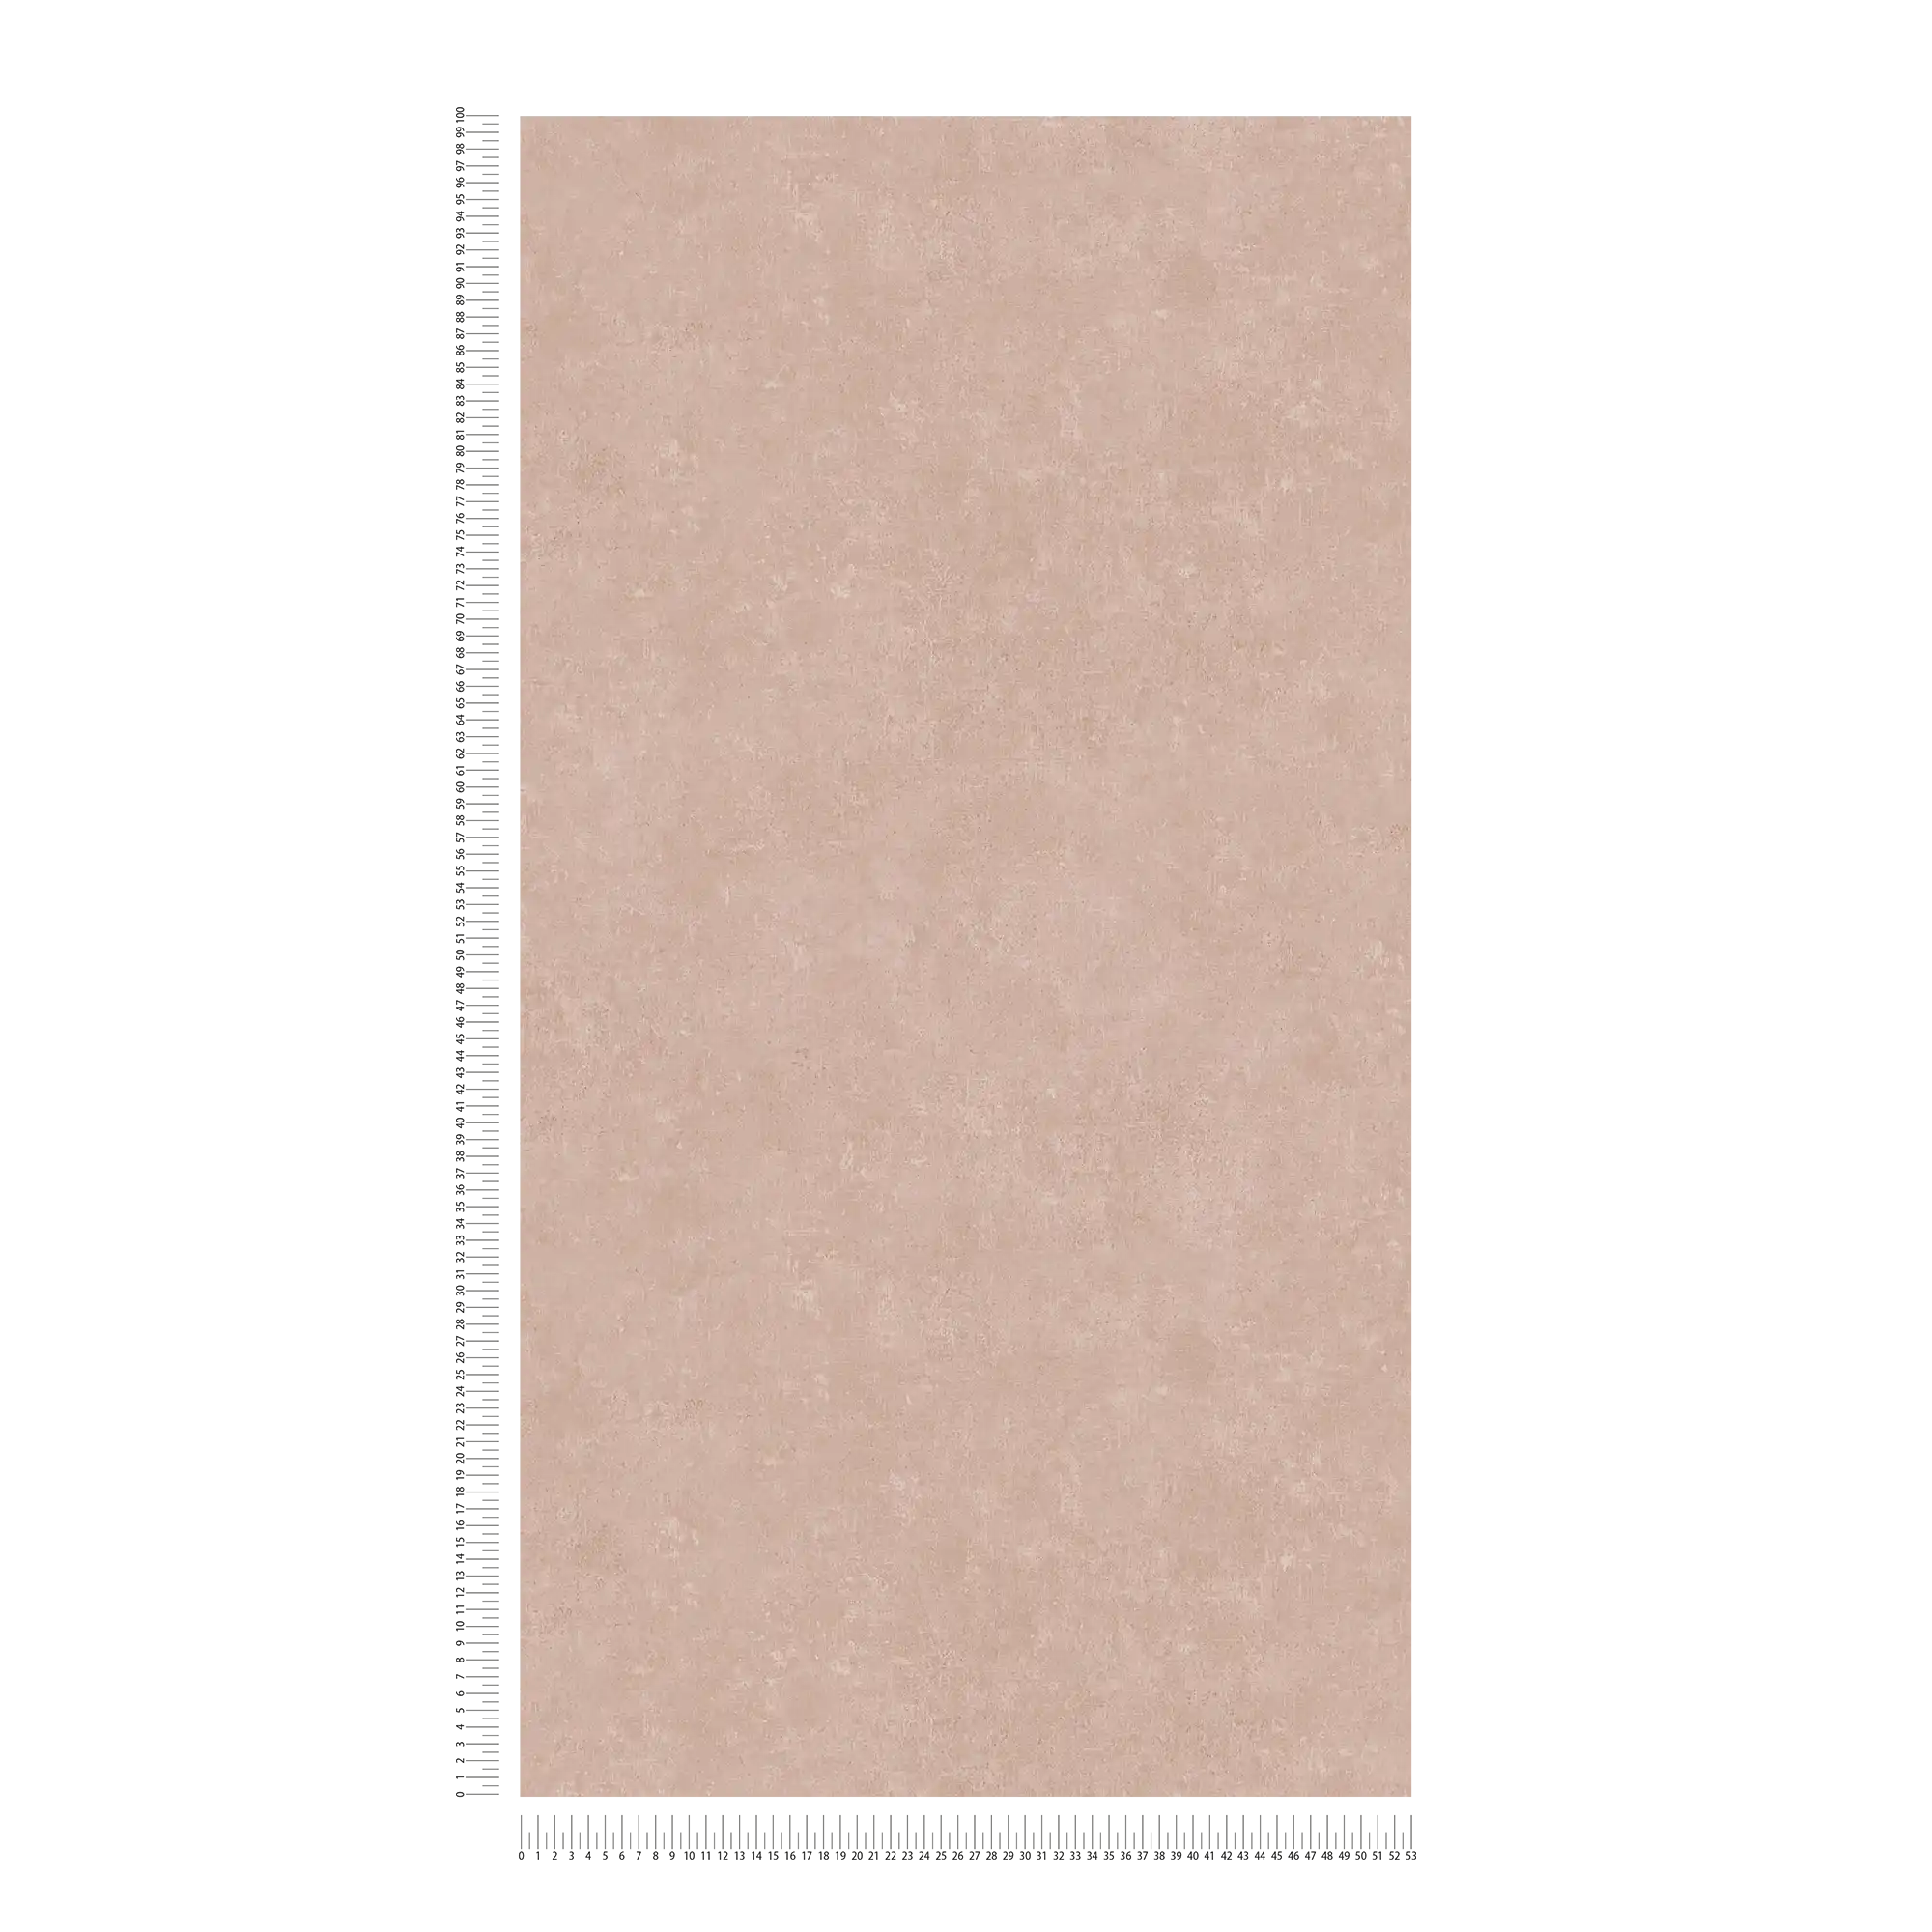             Non-woven wallpaper with tone-on-tone pattern, used look - pink
        